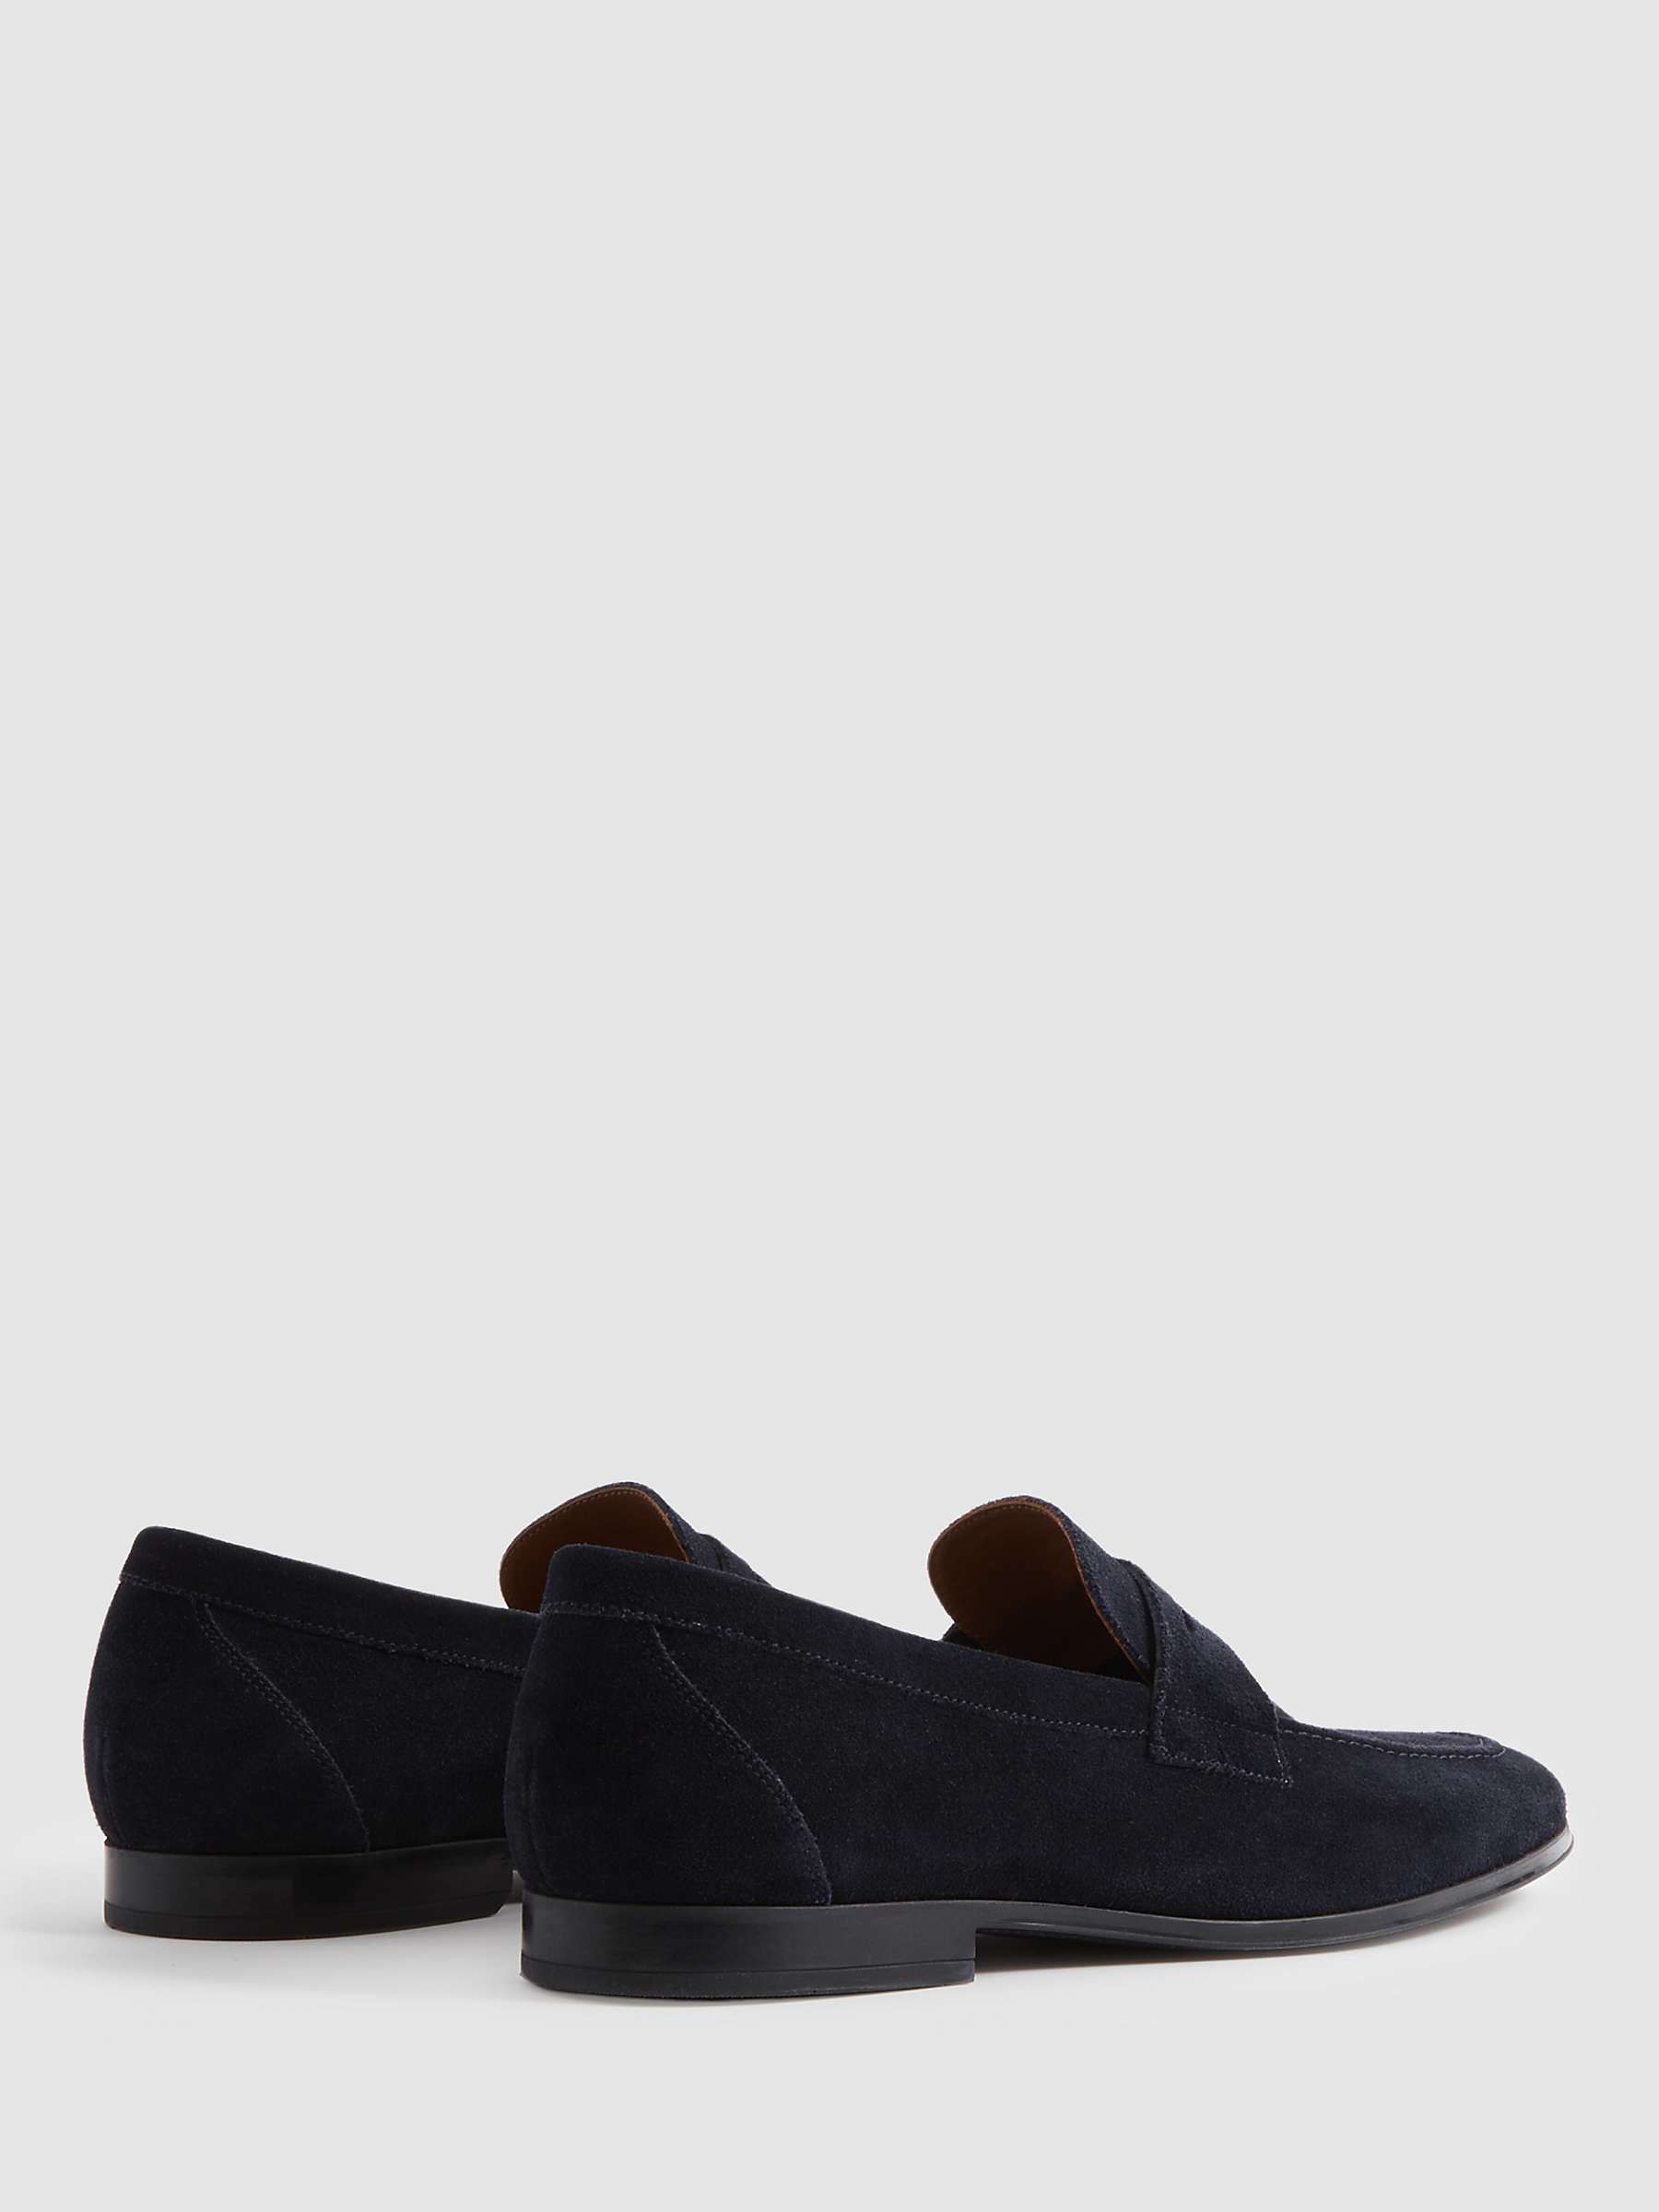 Buy Reiss Bray Suede Loafers, Navy Online at johnlewis.com